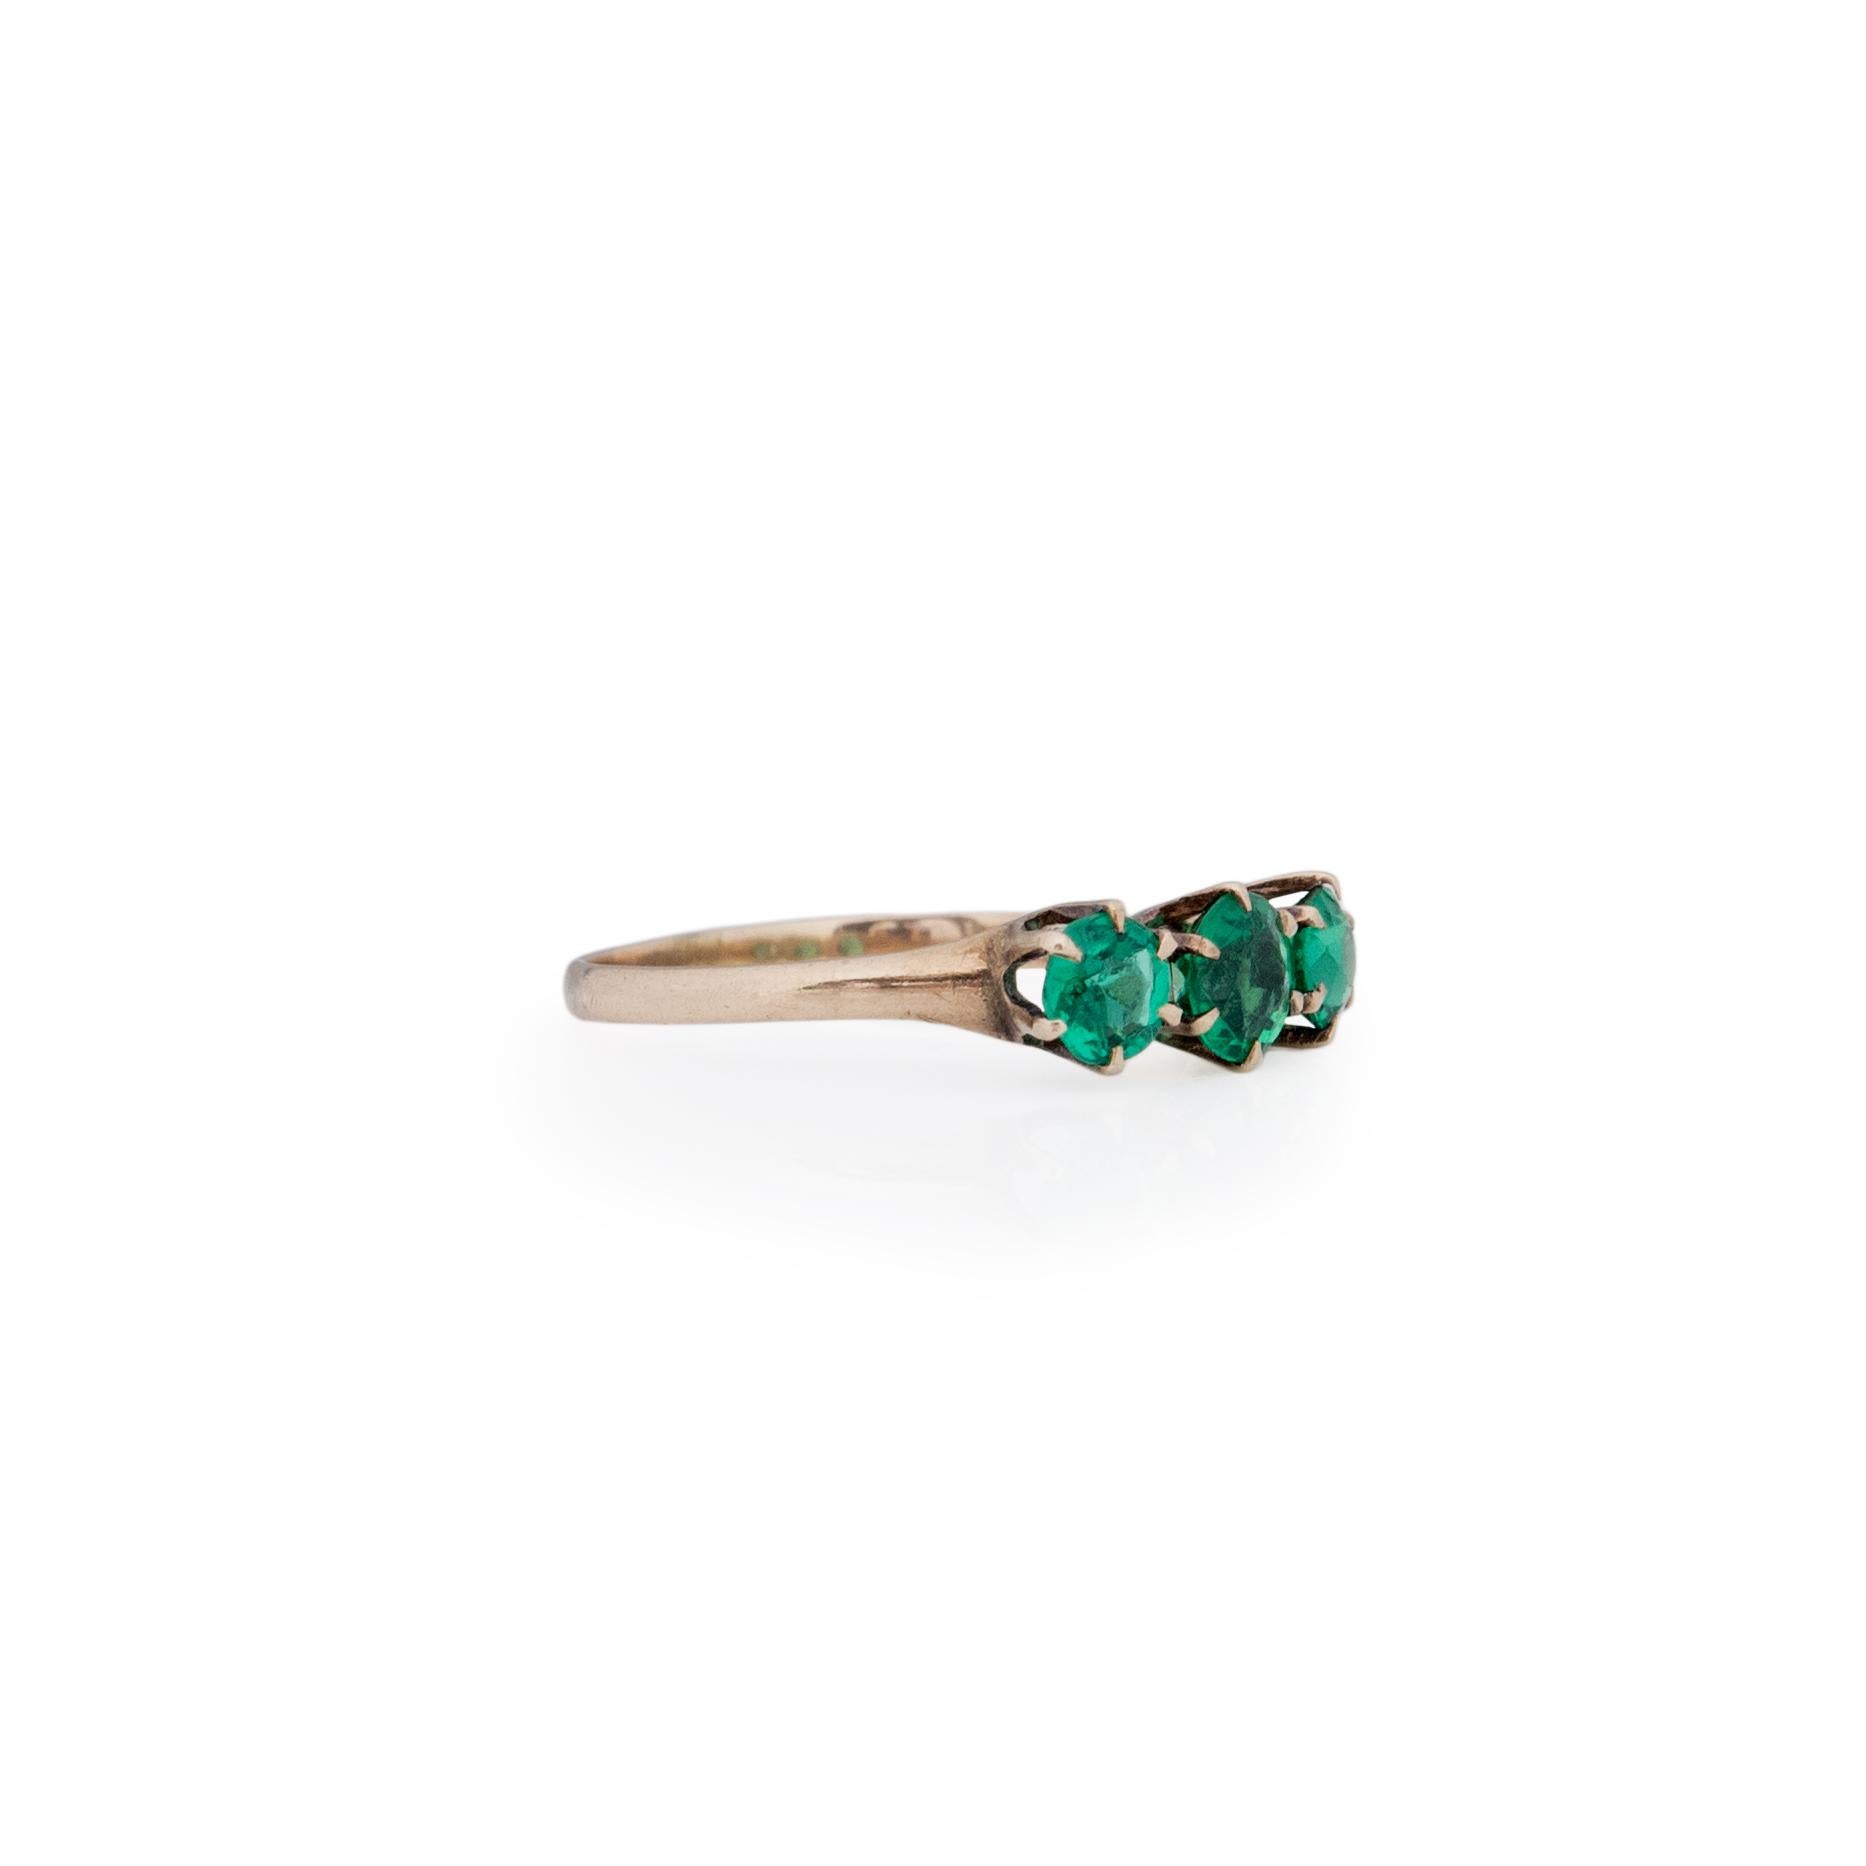 Looking for an authentic Victorian piece? This three stone beauty has excellent color. True to the era, this 10k yellow gold setting holds these green glass gems with six prongs each. The strait shank design allows all the focus to be on the center